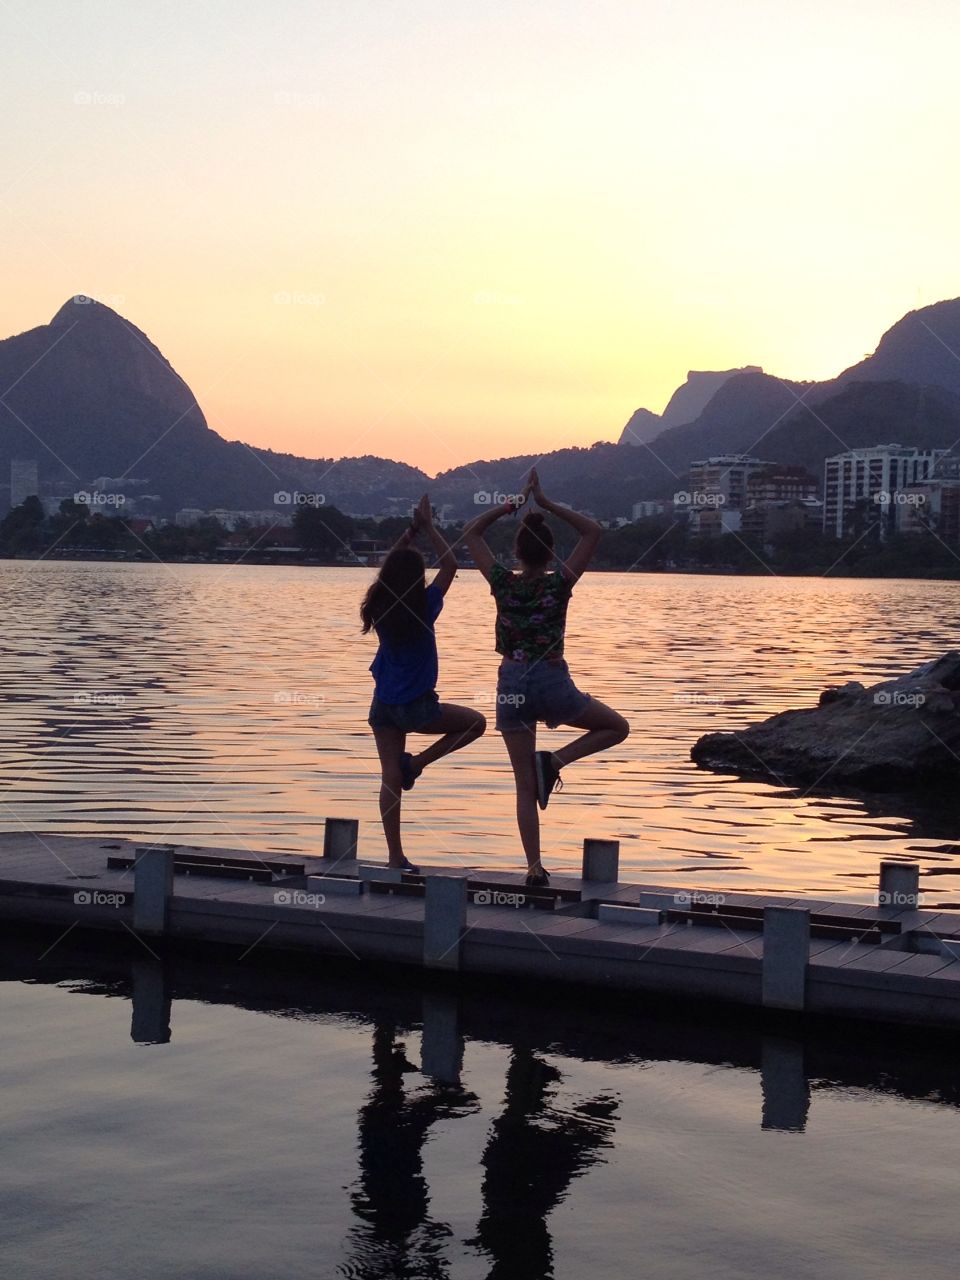 Two girls posing in a beautiful sunset by a lake